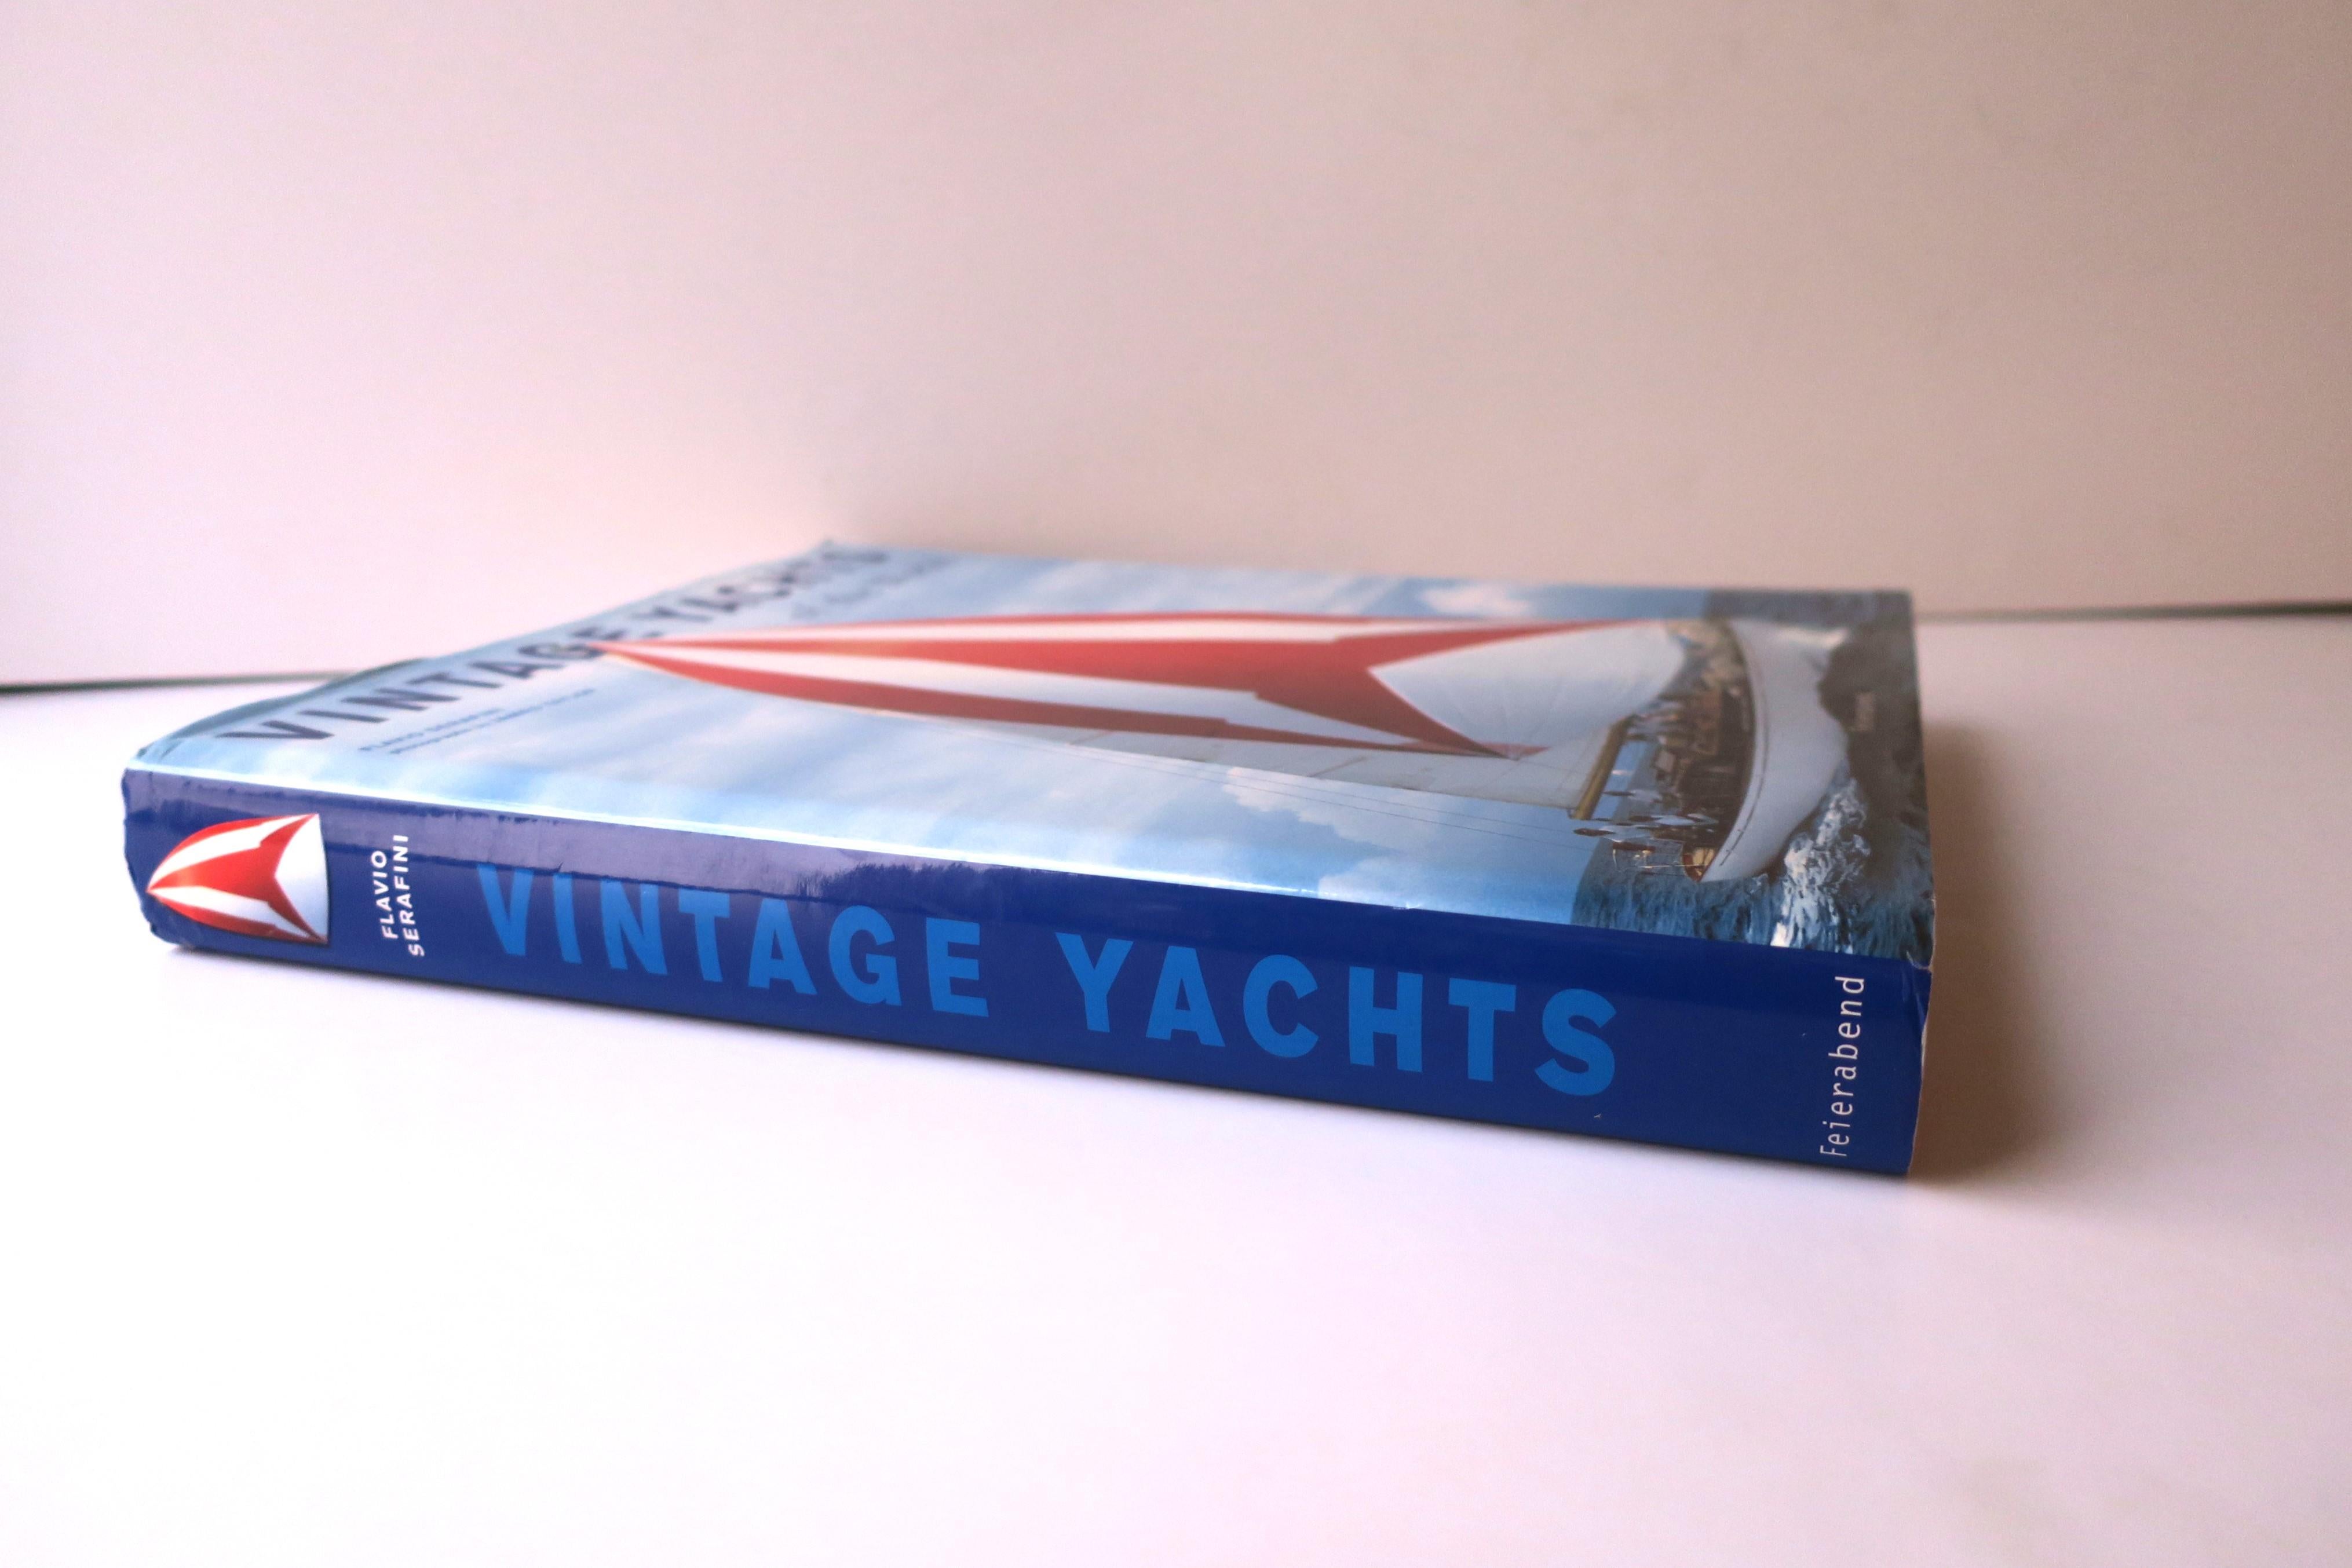 A chic coffee table book, Vintage Yachts of the World, by Flavio Serafini, 2003. Print in Italy. Published in Germany. All details outline below. An incredibly beautiful and detailed book about the best vintage yachts of the world through the eyes